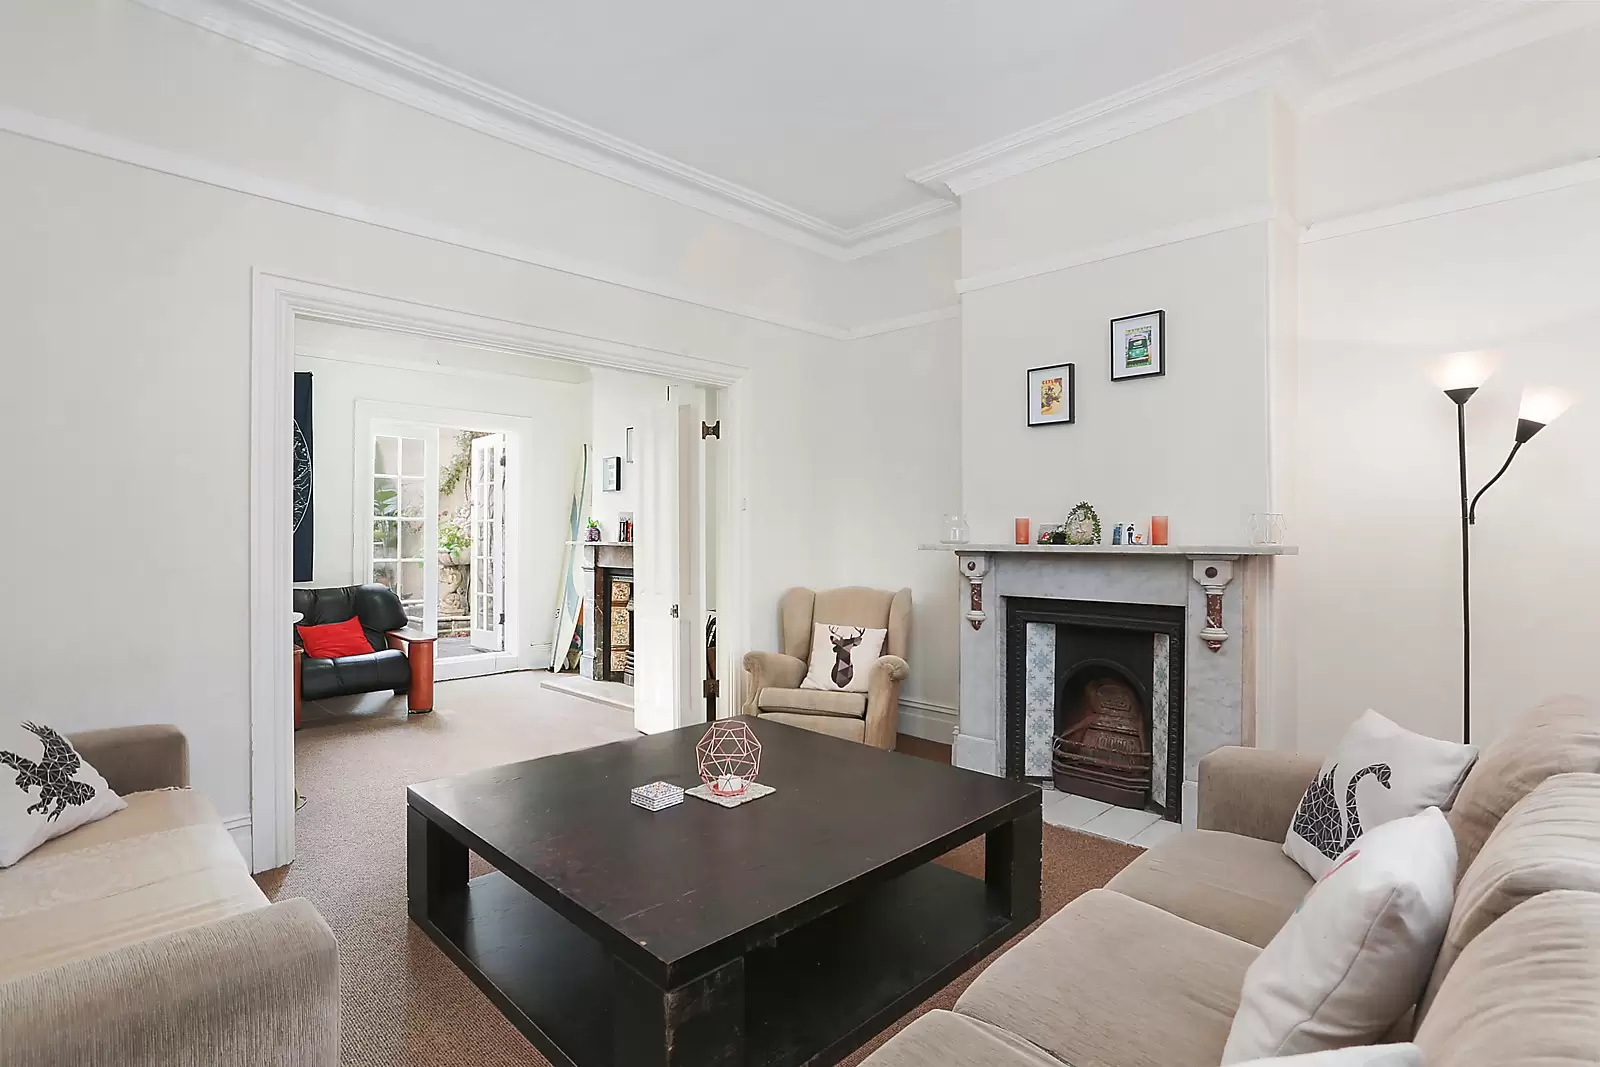 Photo #3: 42 Oxford Street, Woollahra - Sold by Sydney Sotheby's International Realty